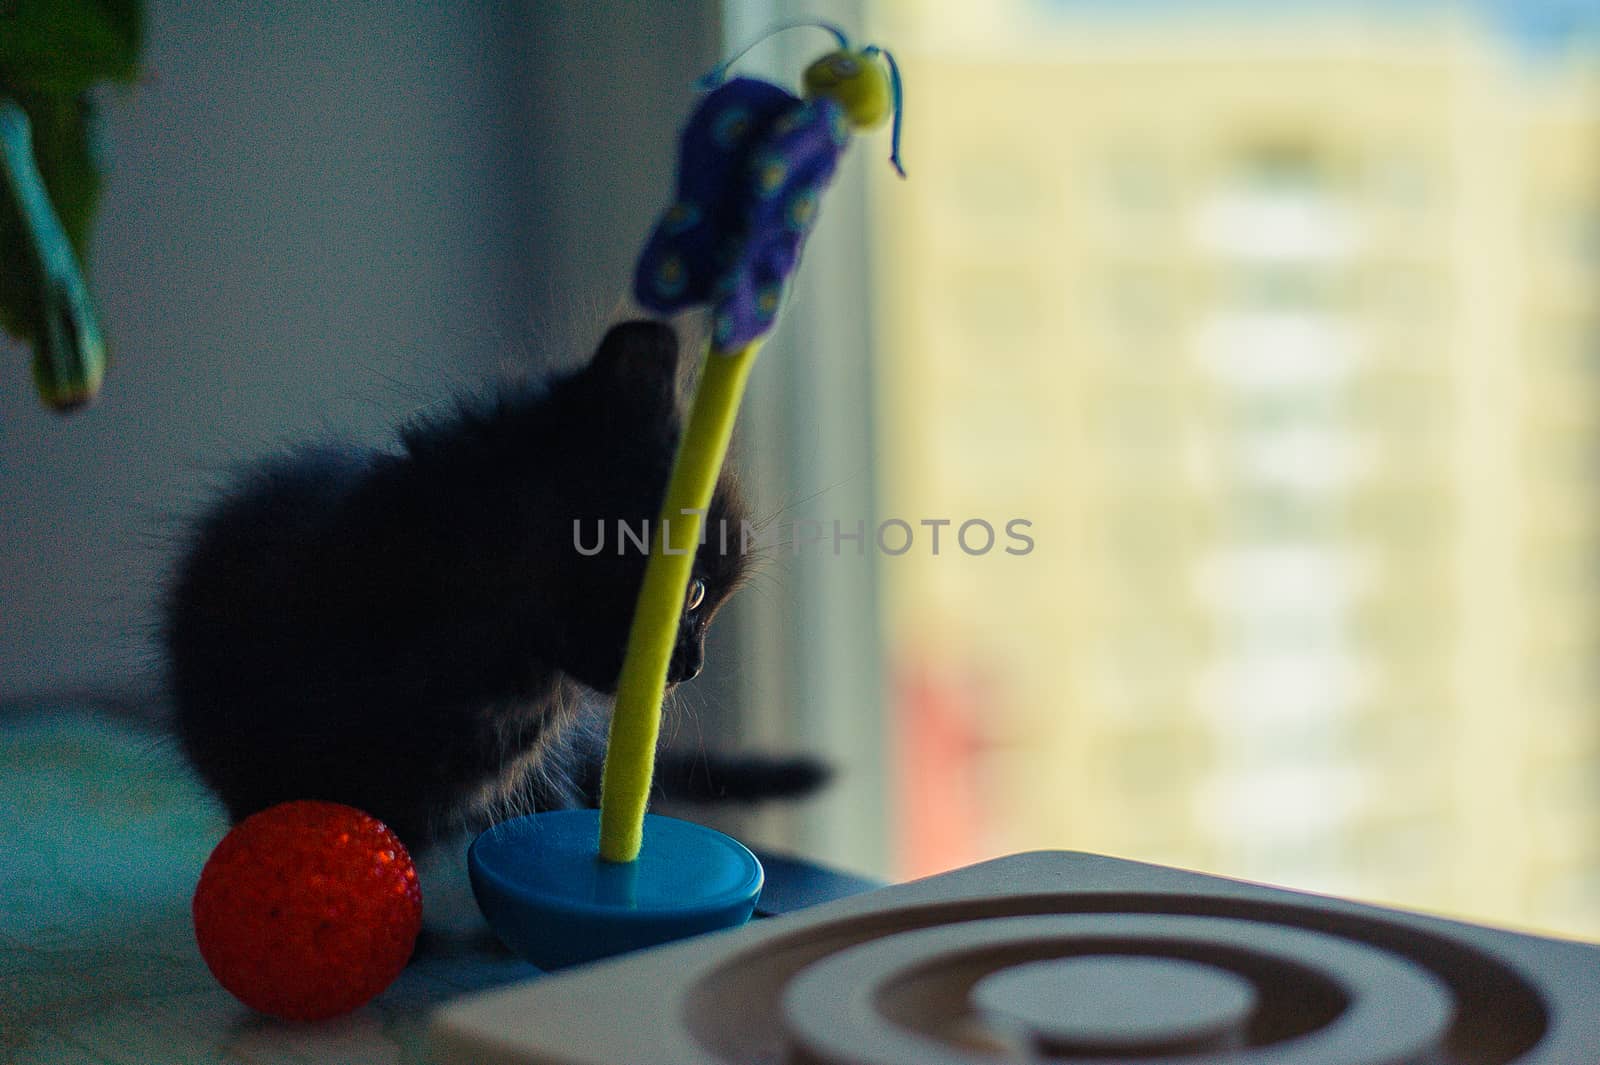 black kitten is played with a roly-poly toy and a red ball on the table near the window